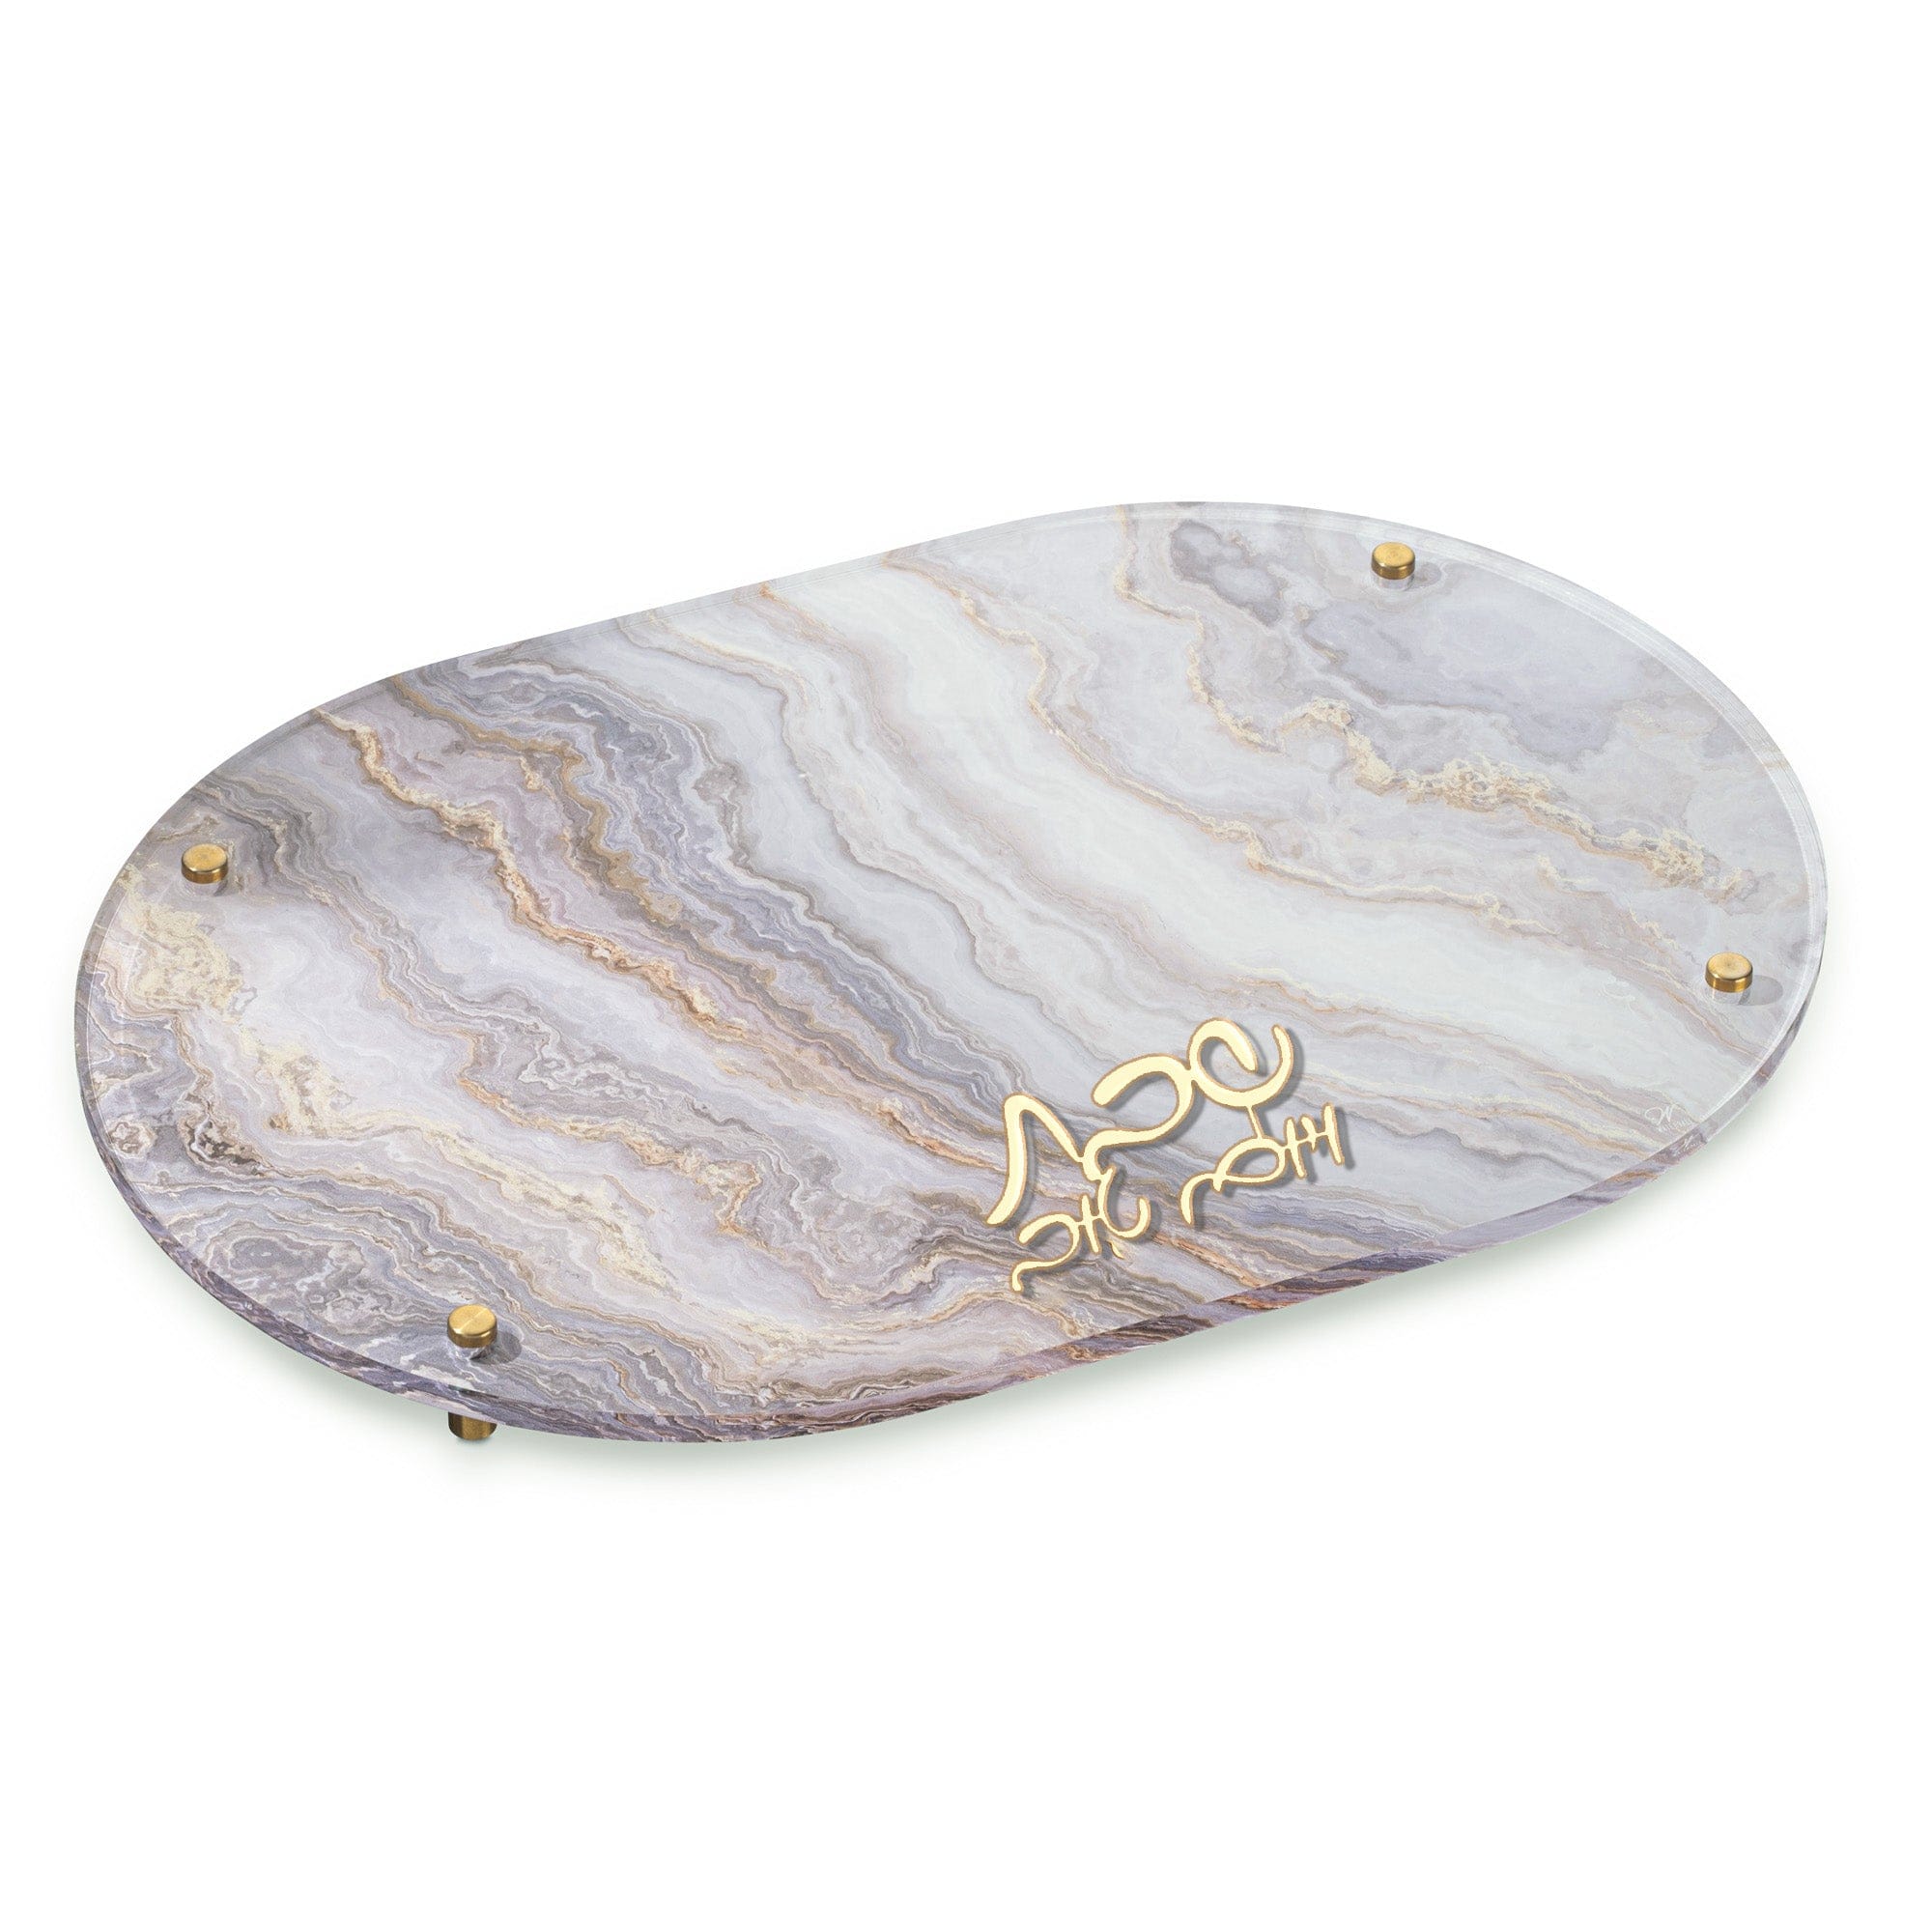 Agate Challah Board Small / Hadlokas Neiros Tray - Waterdale Collection